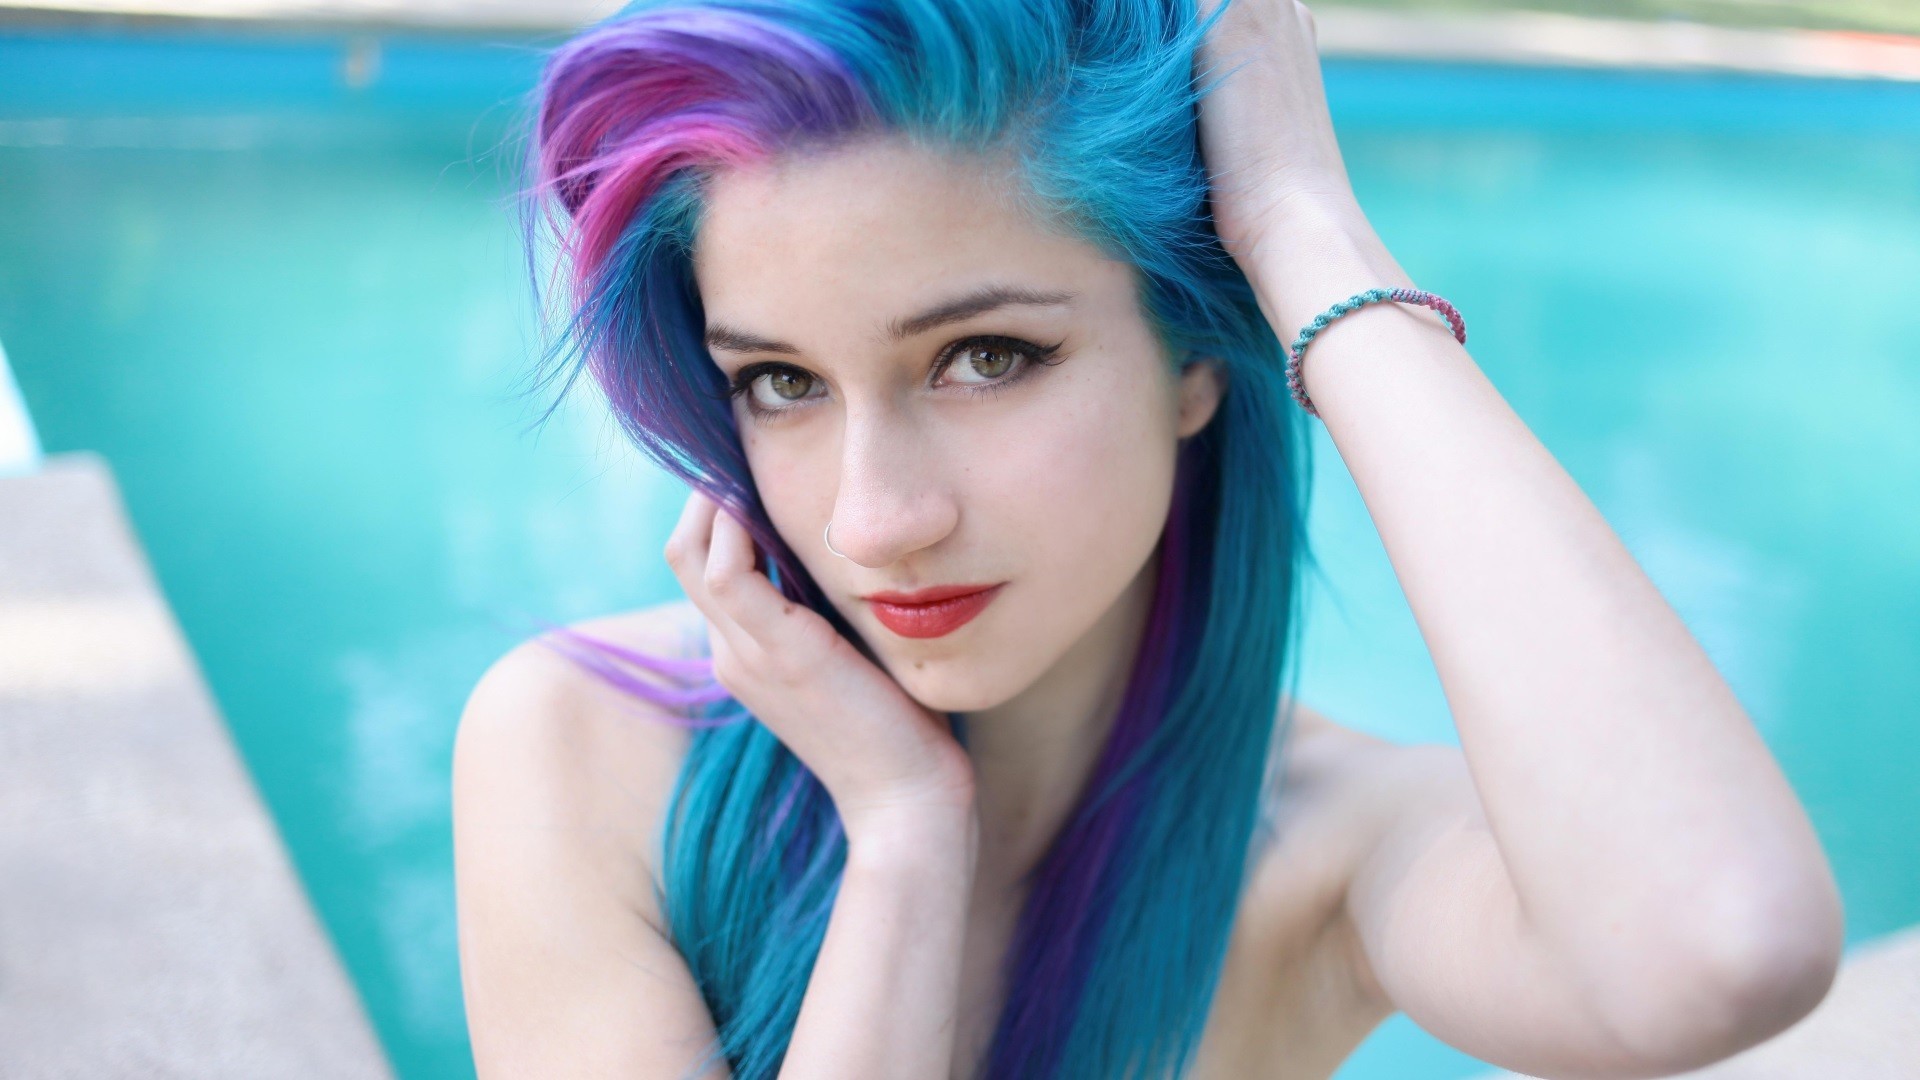 3. "How to Incorporate Blue Hair into Your Bachelorette Party Theme" - wide 7